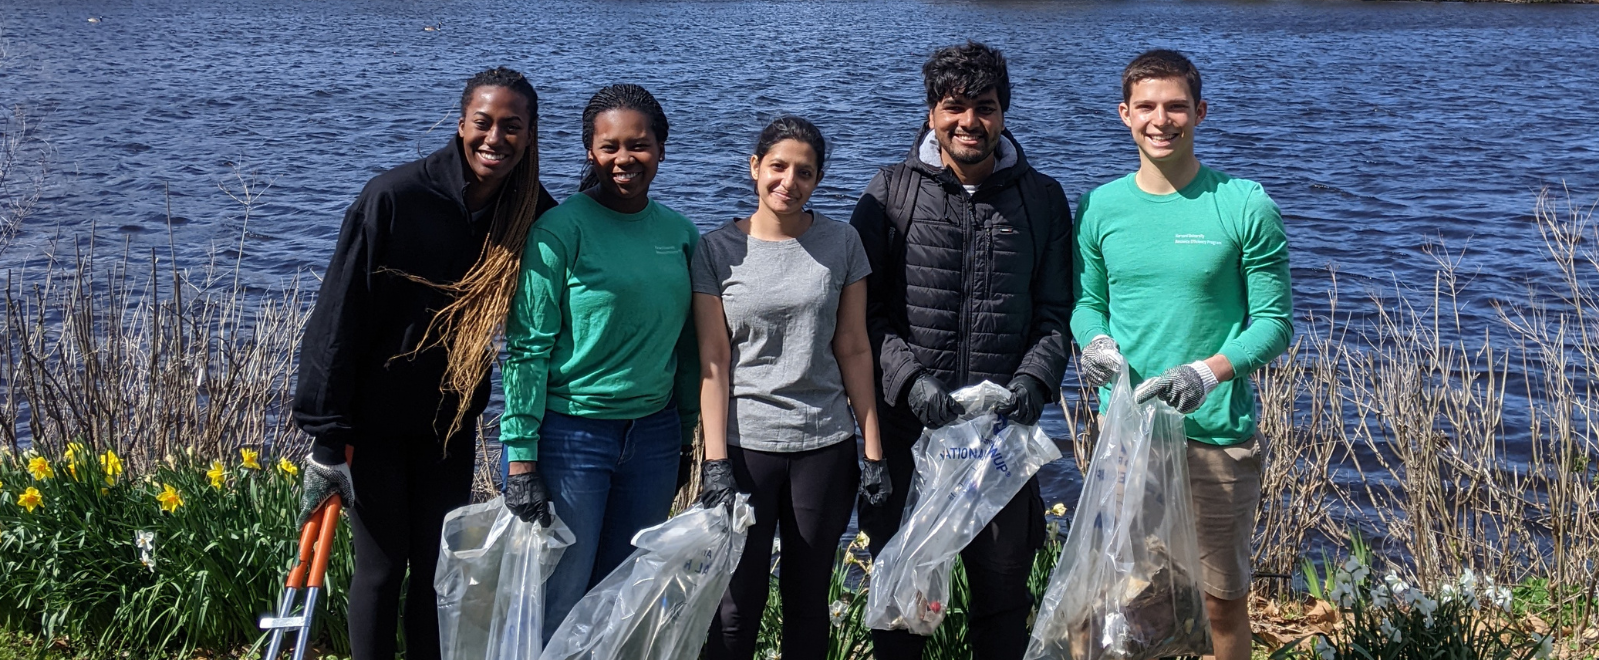 Students pose for photo with bags of trash during the 2022 Charles River Clean-Up.